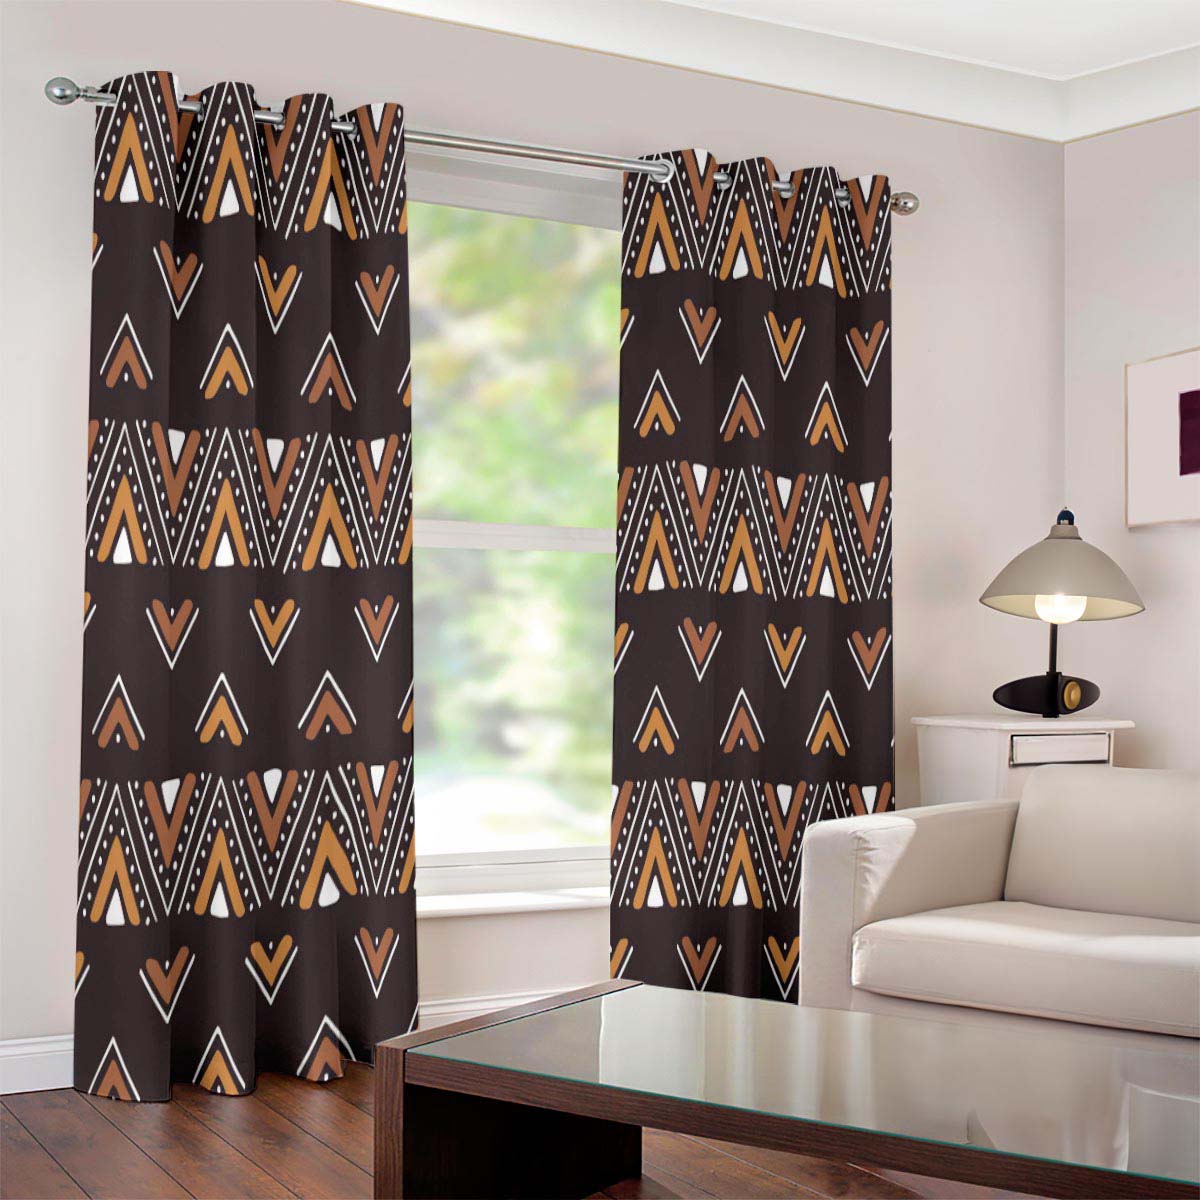 African Curtains Blackout in Grommet Mudcloth Print - Bynelo